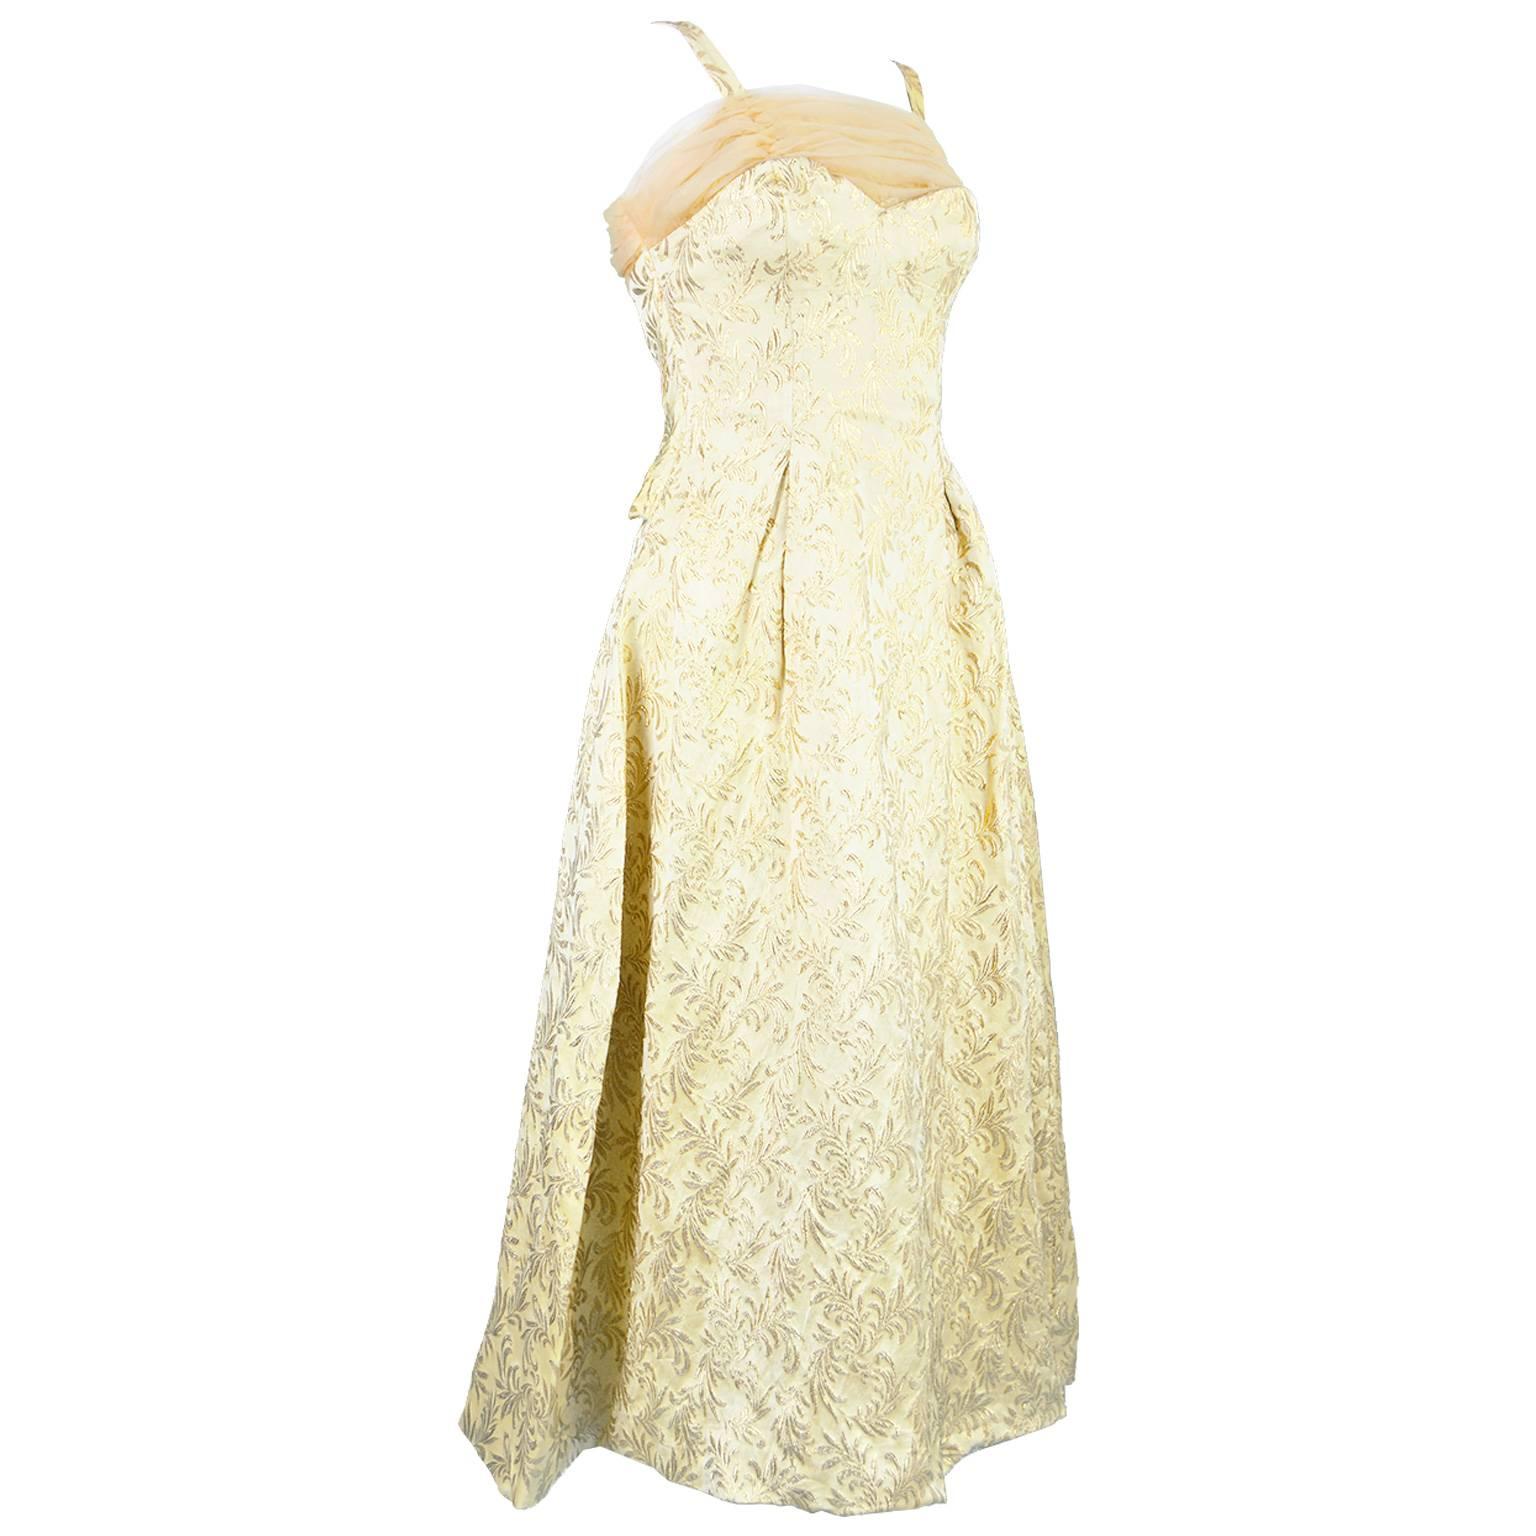 Gold Brocade Evening Gown with Chiffon Train, 1950s For Sale